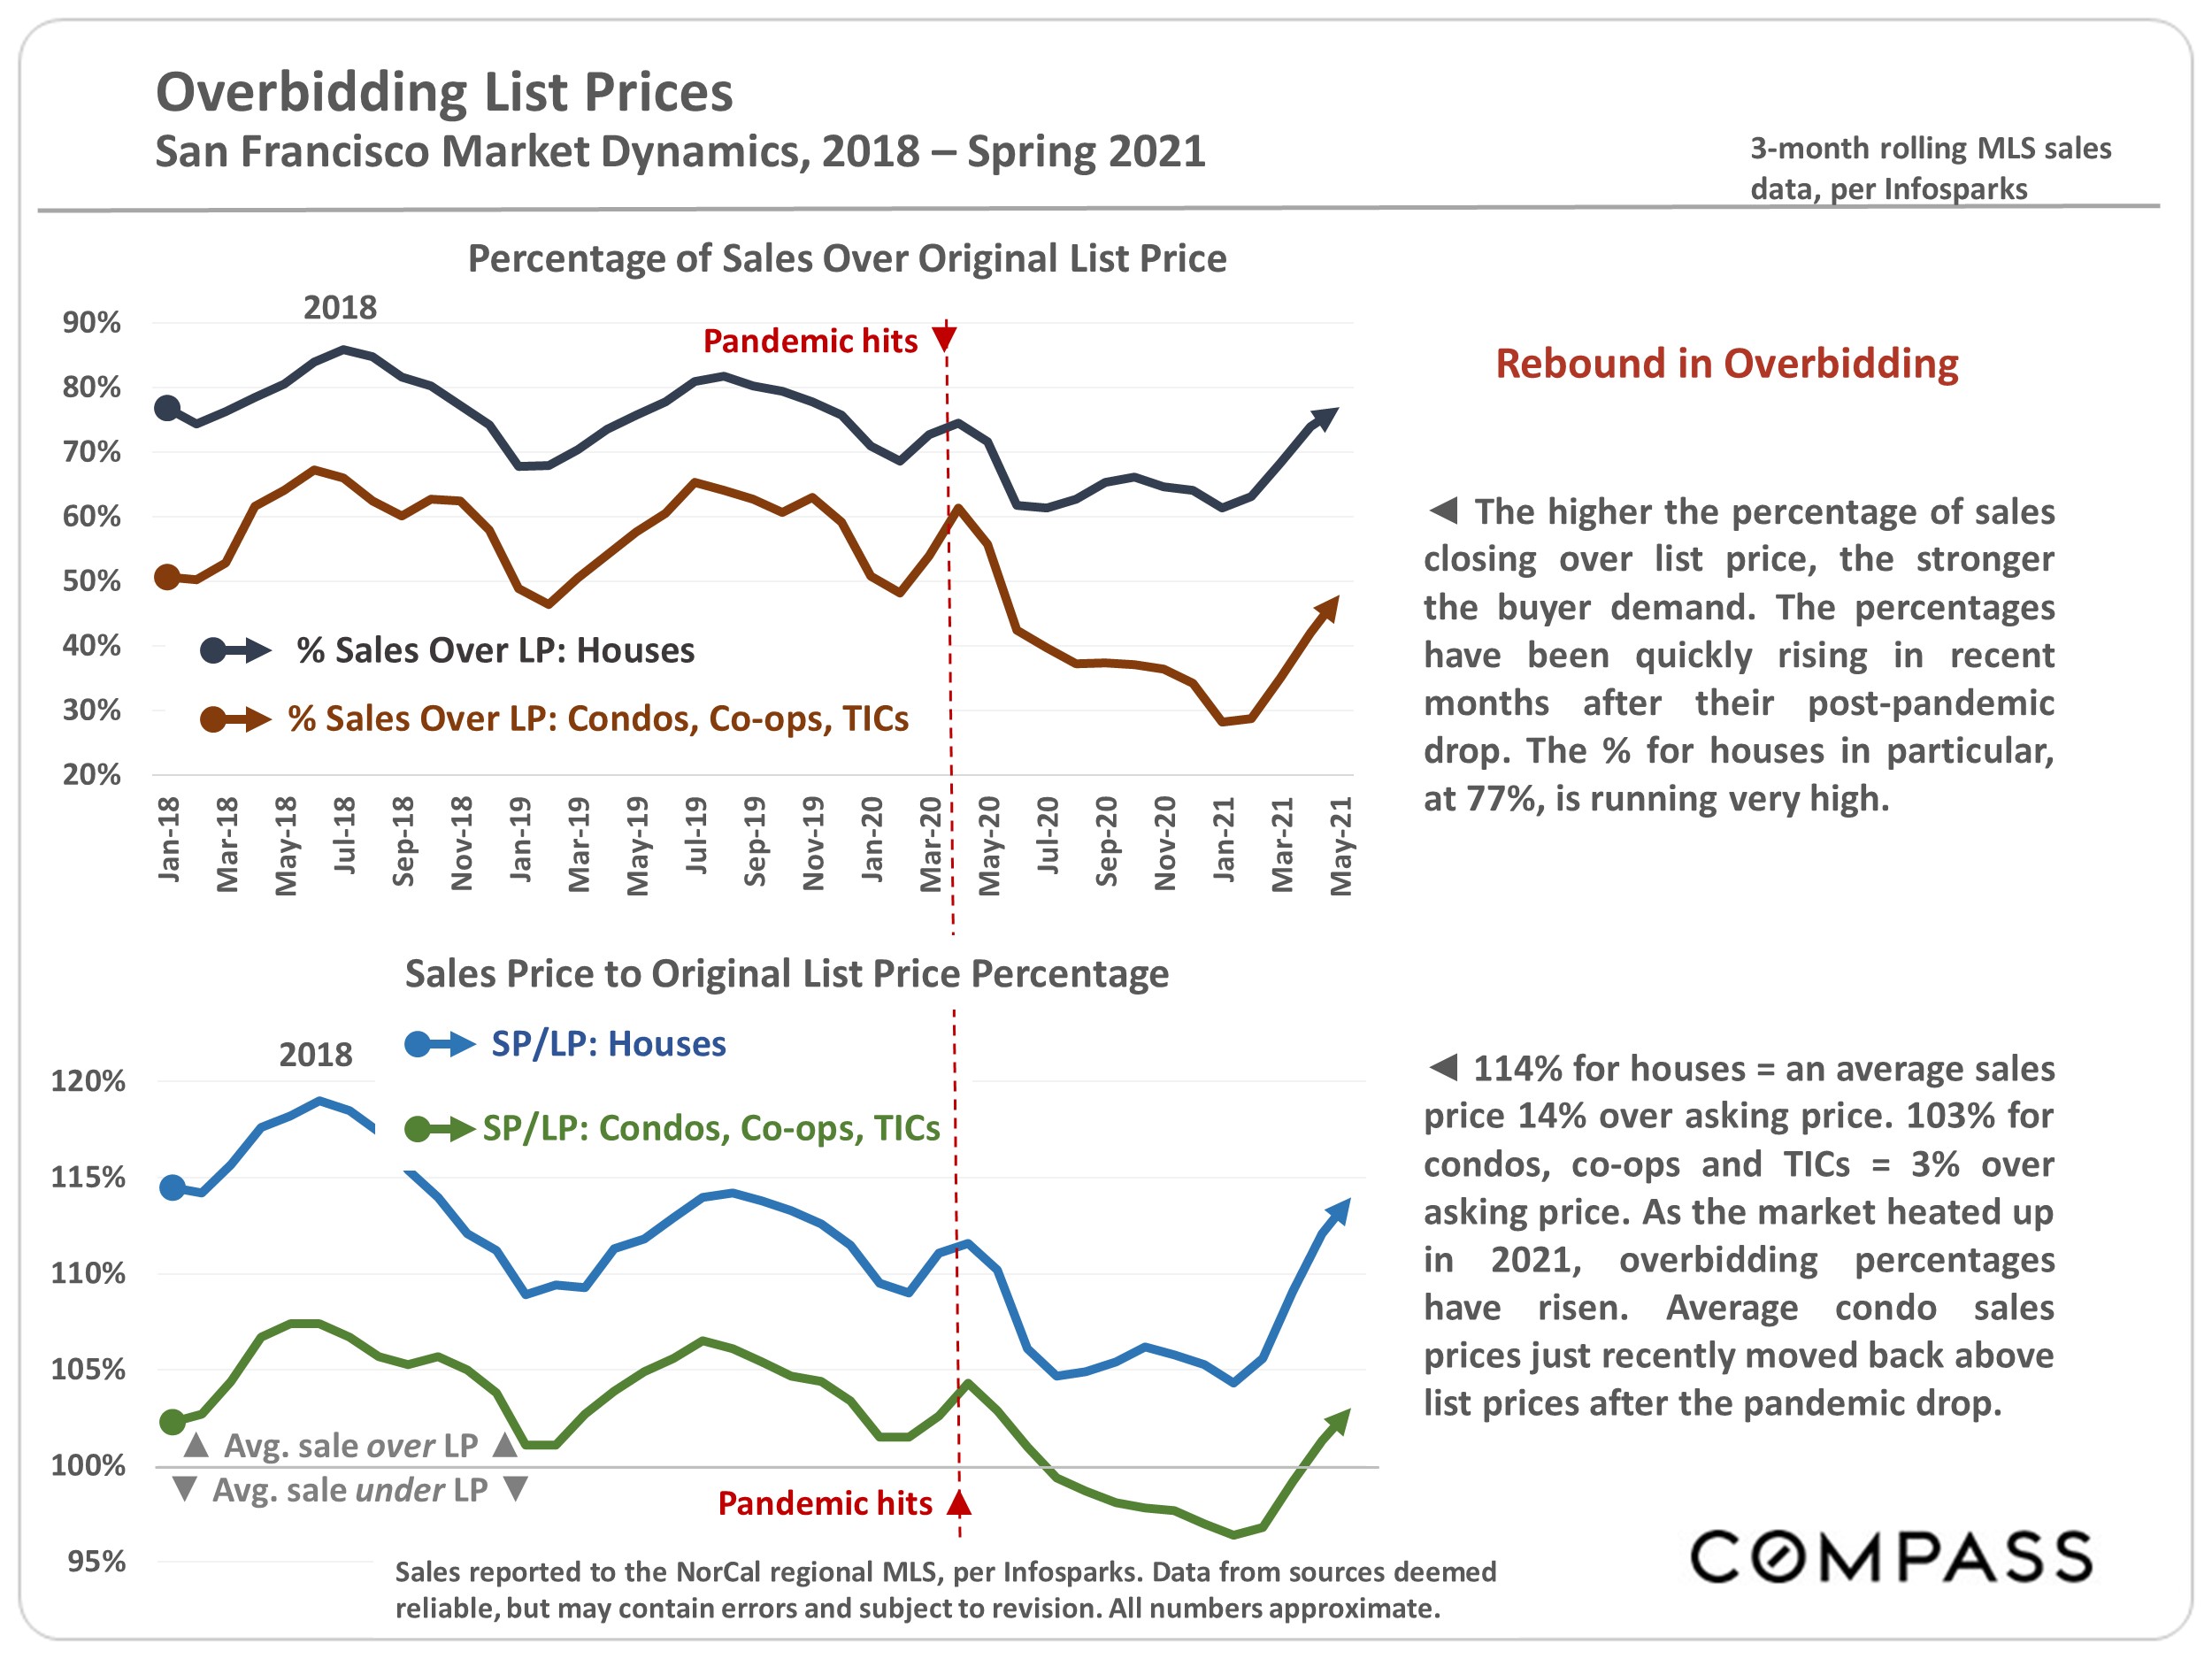 Chart showing theOverbidding List Prices, San Francisco Market Dynamics, 2018 - Spring 2021, 3-month rolling MLS sales data